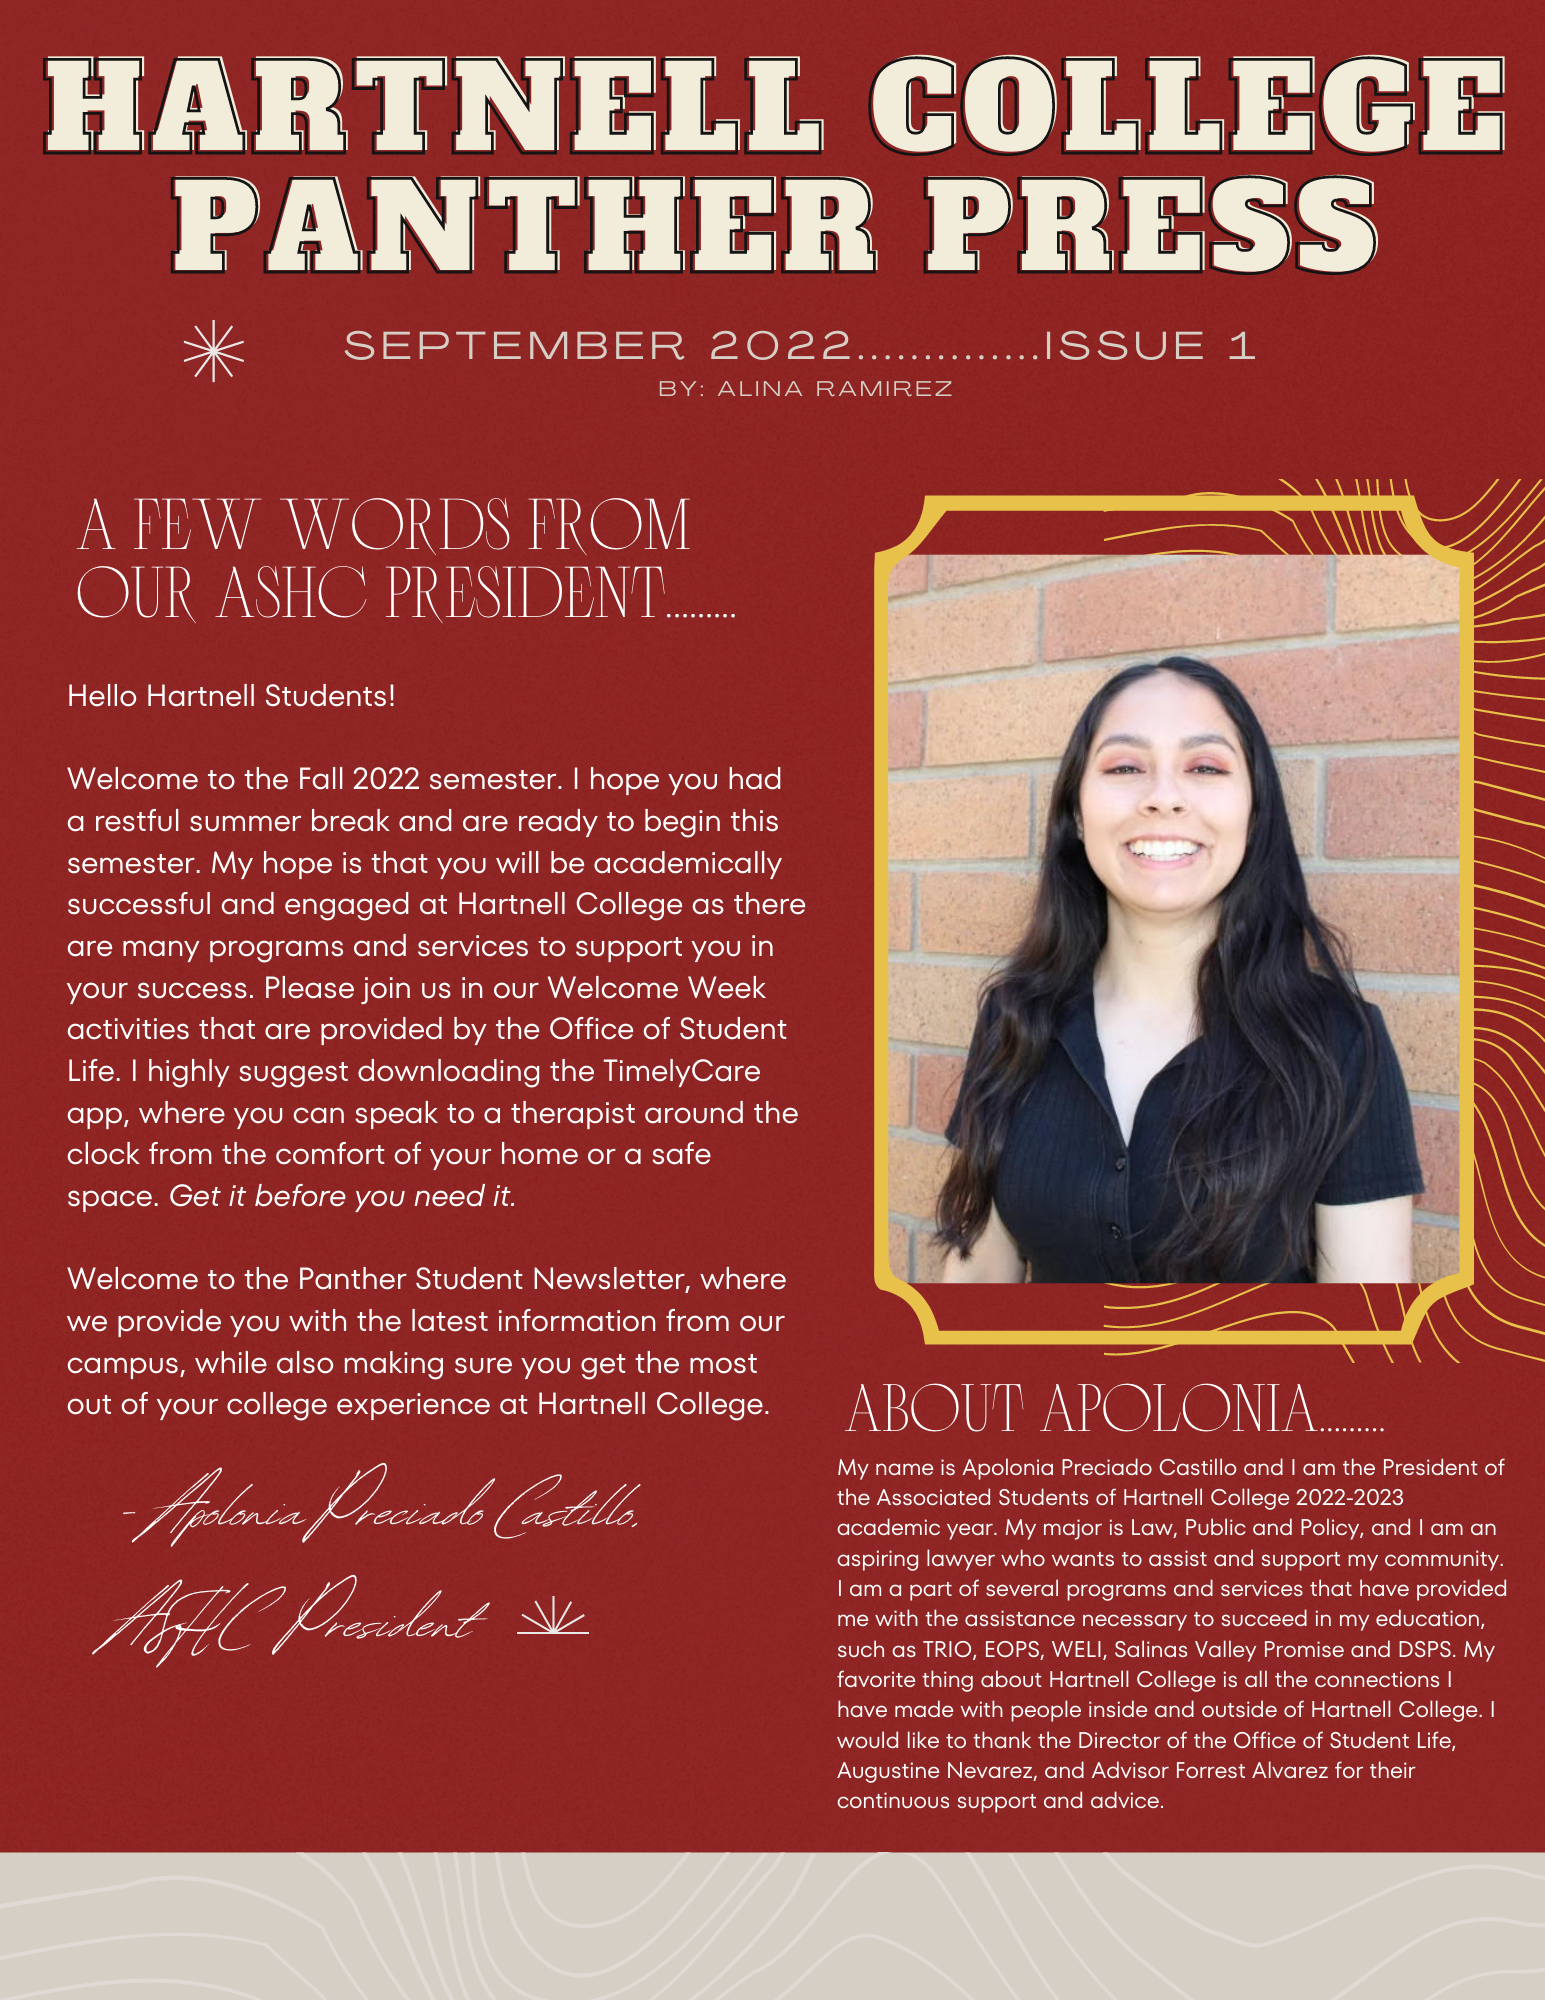 Panther Press Issue #1